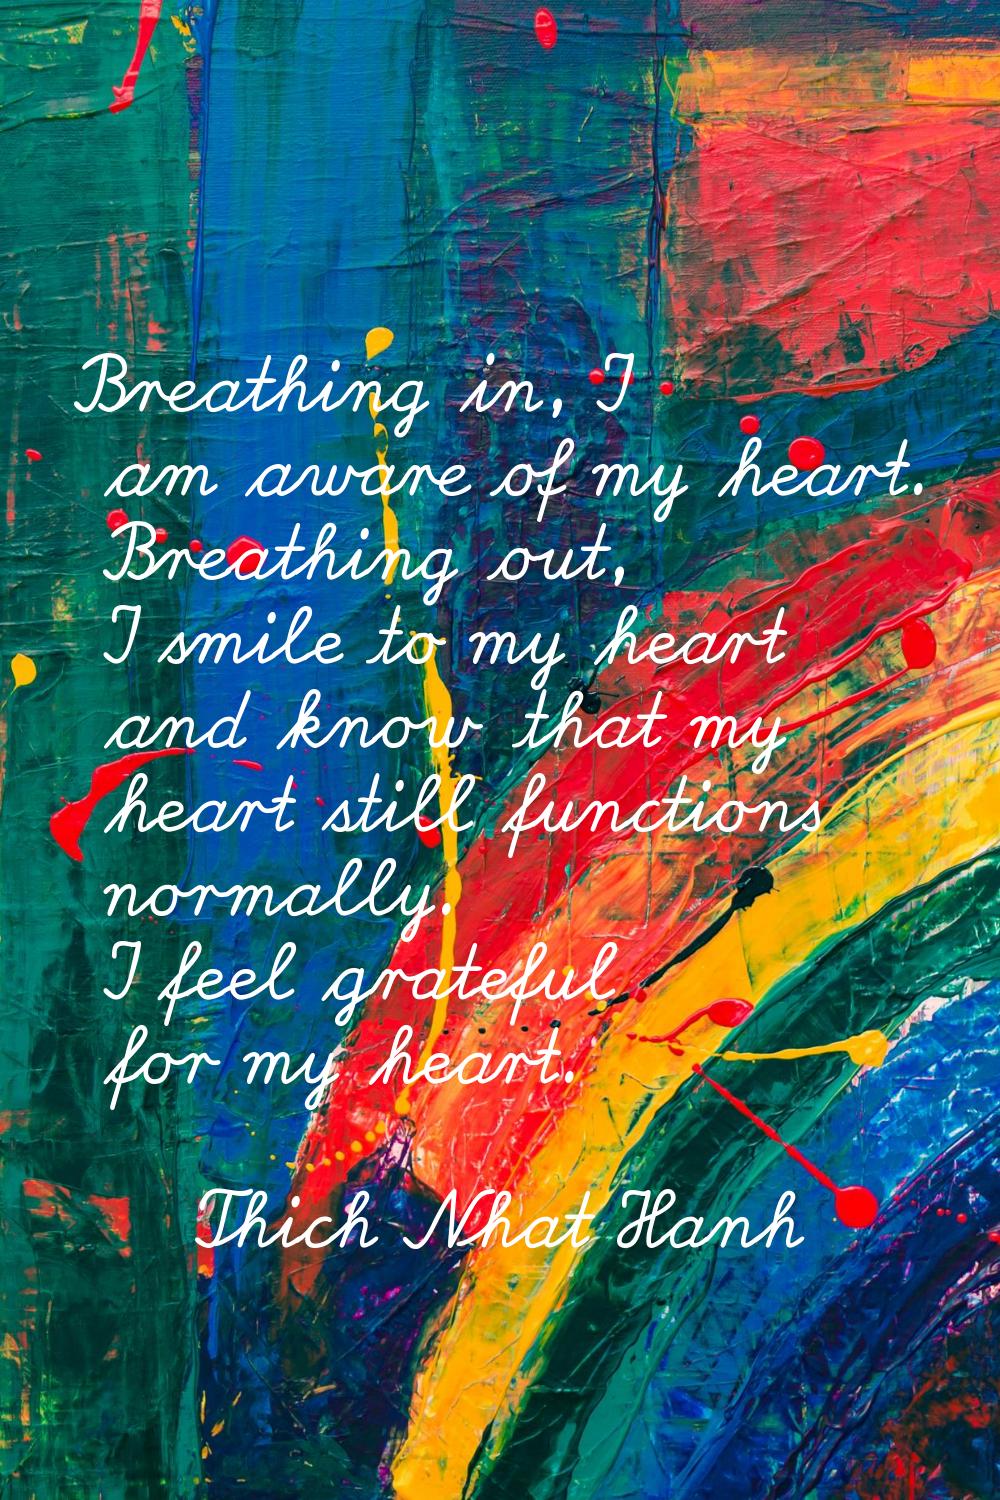 Breathing in, I am aware of my heart. Breathing out, I smile to my heart and know that my heart sti